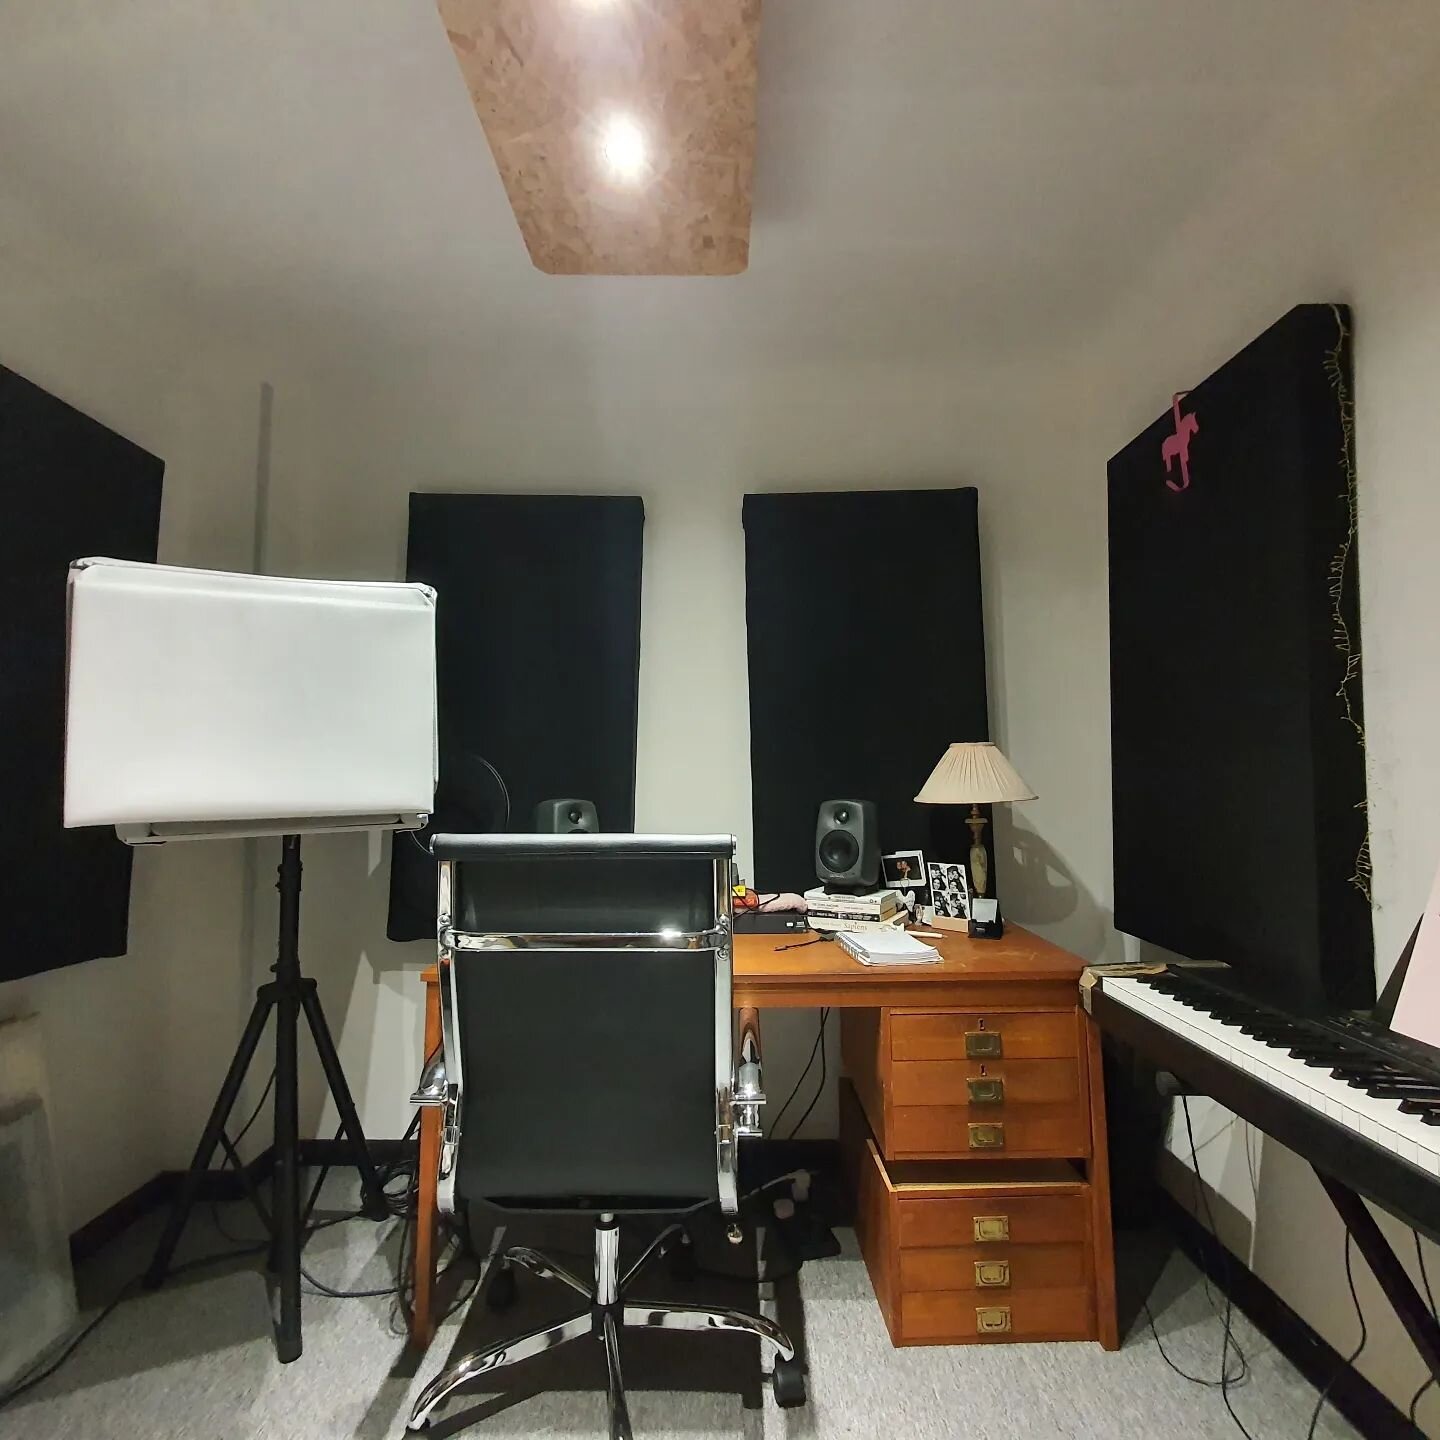 Sole access rolling monthly hire studios perfect for bands and producers looking for a permanent space to home all of your musical projects under one roof. 24 hour access, alarmed building with 8k cctv, 350mb wifi. Call Ben to view our last space for